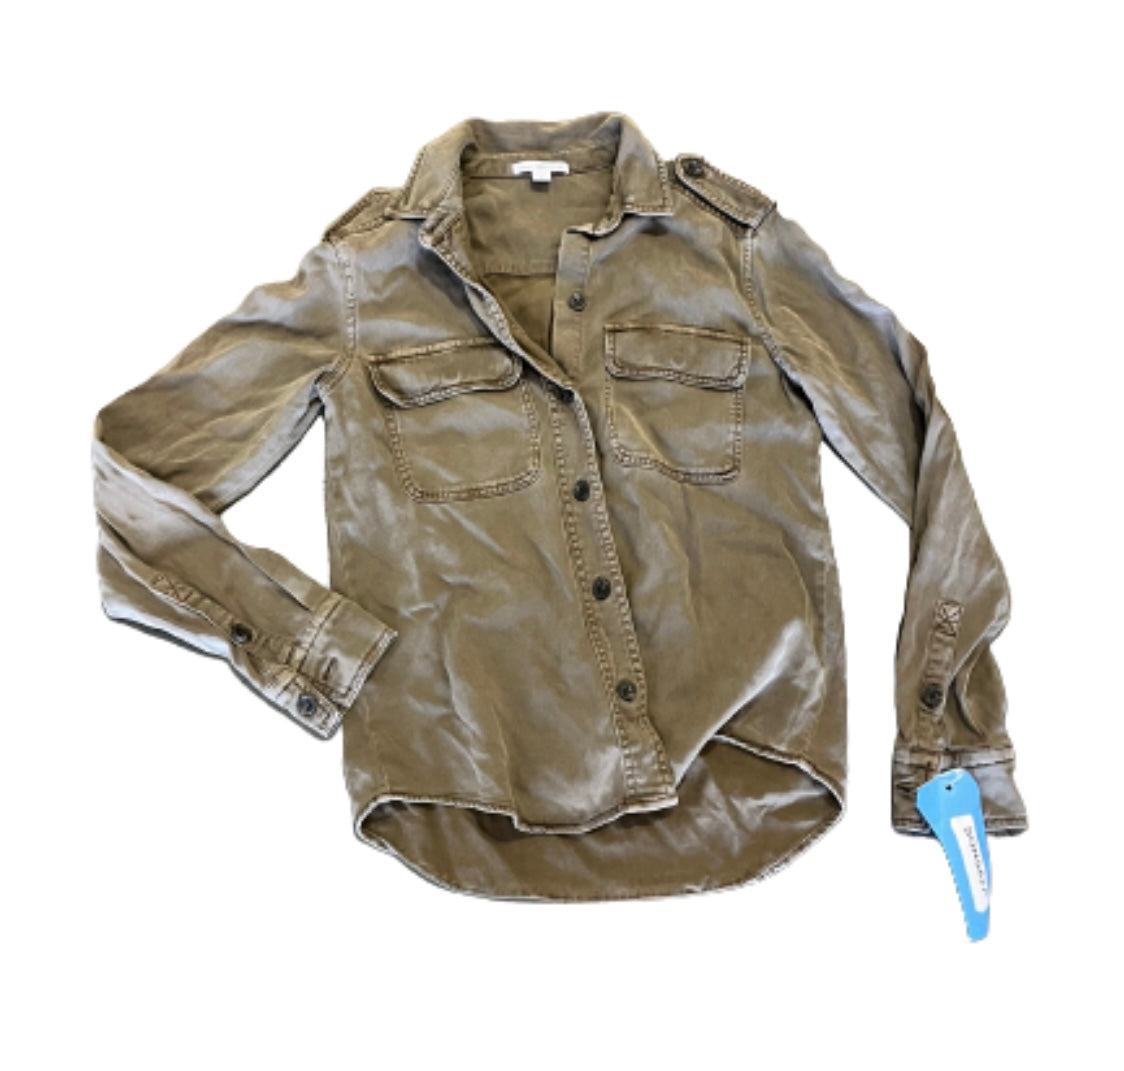 SONS OF ANARCHY: Gemma's Green JAMES PEARSE Tactical Designer Shirt (S)